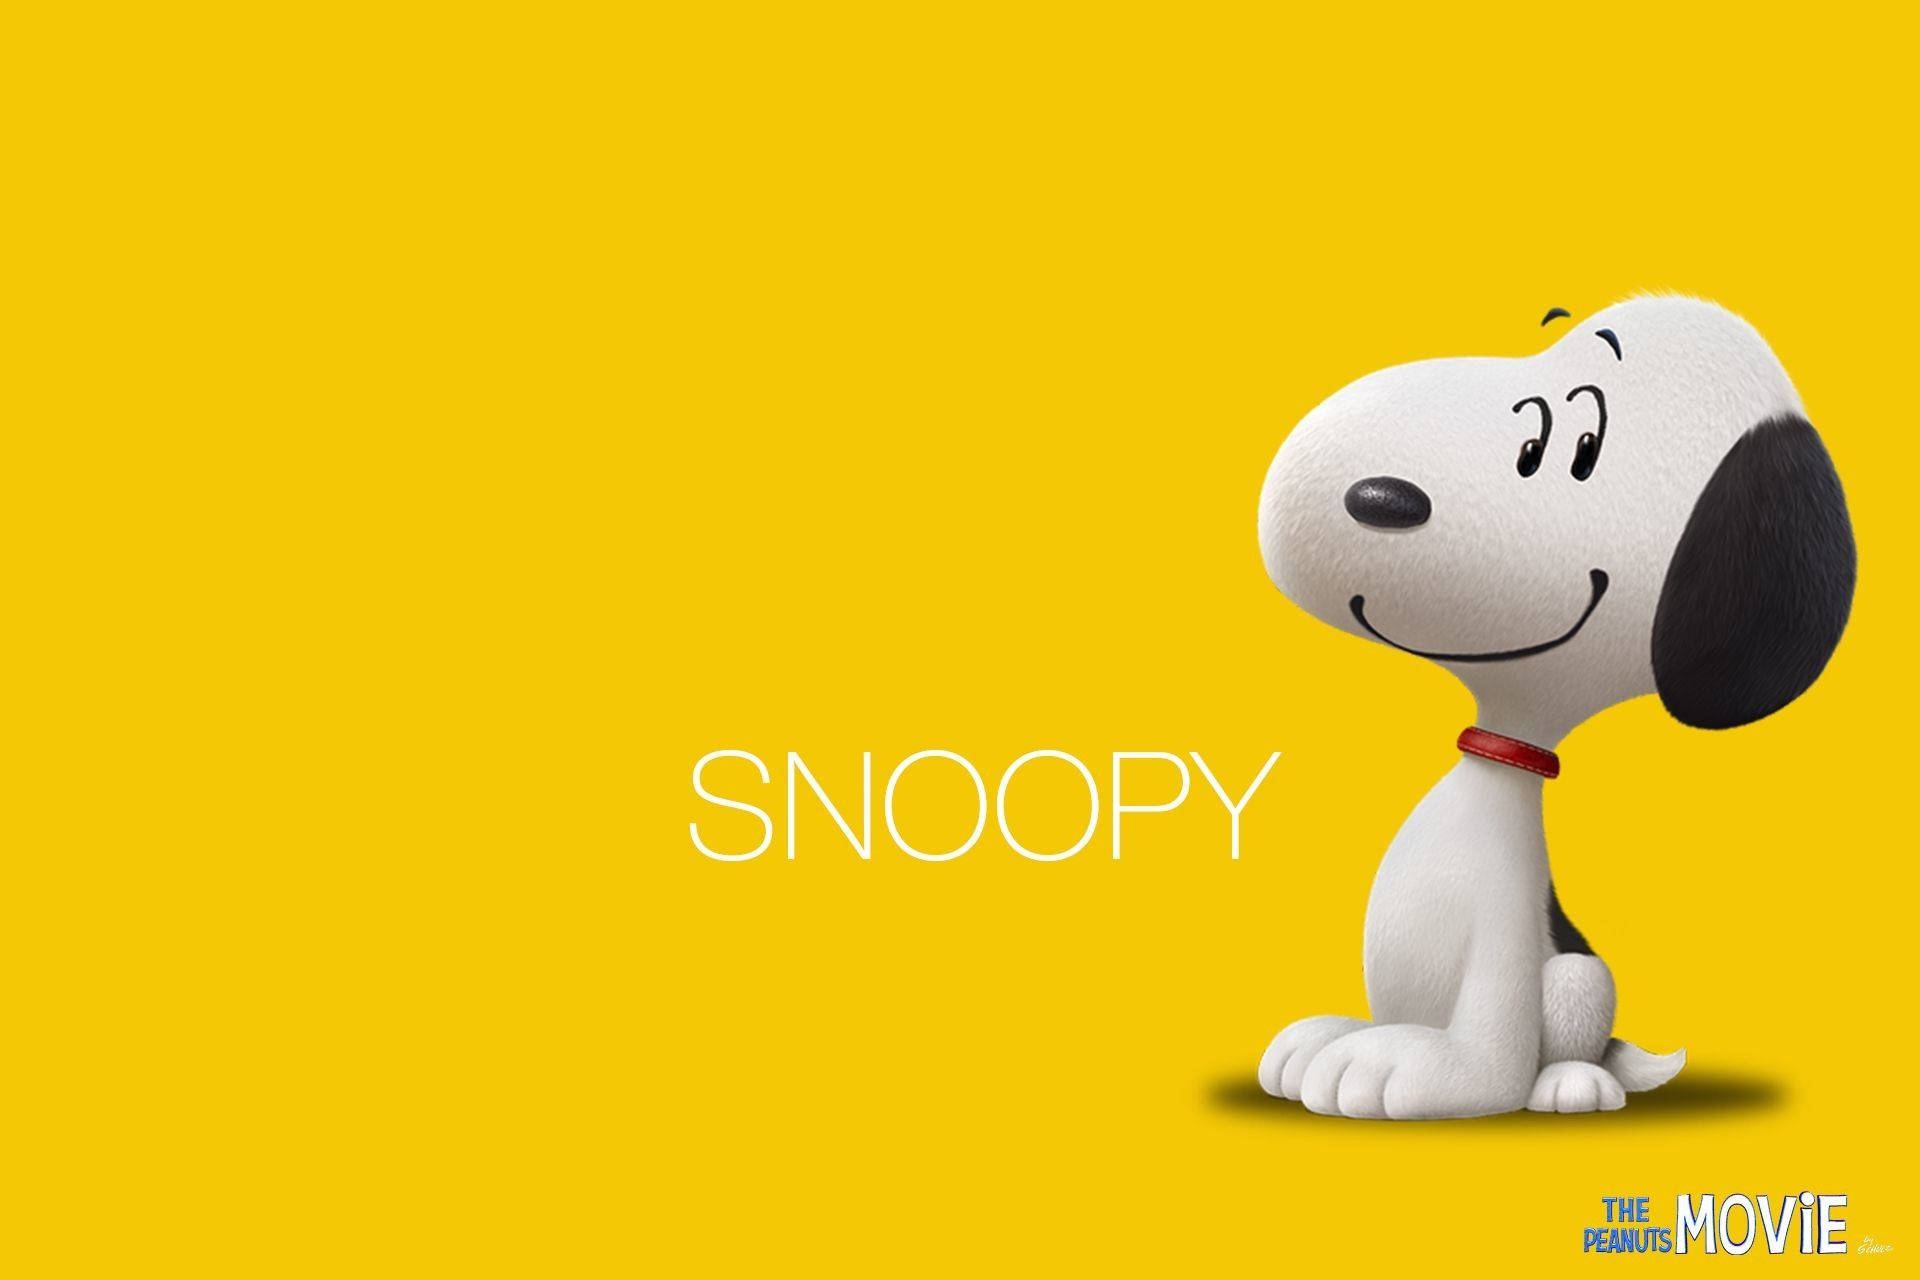 Download Snoopy Wallpaper